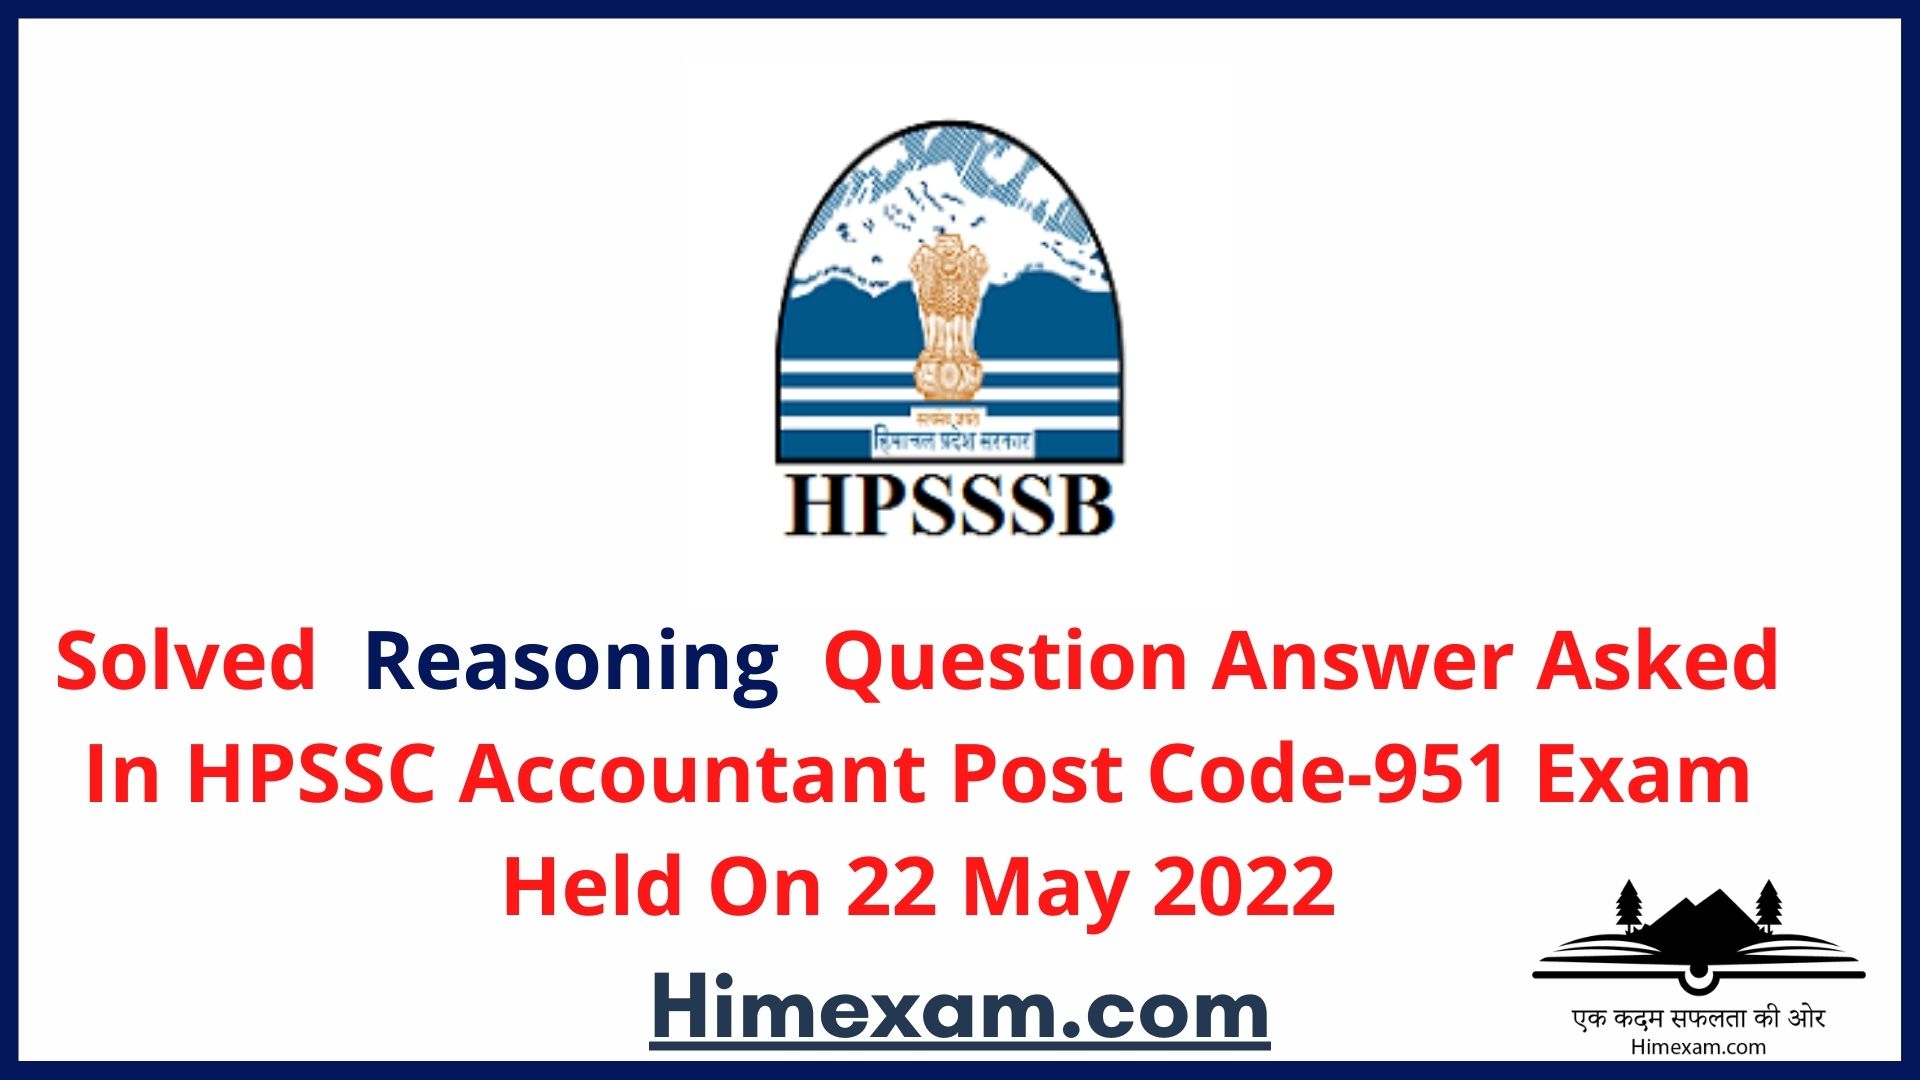 Solved Reasoning Question Answer Asked In HPSSC Accountant Post Code-951 Exam Held On 22 May 2022